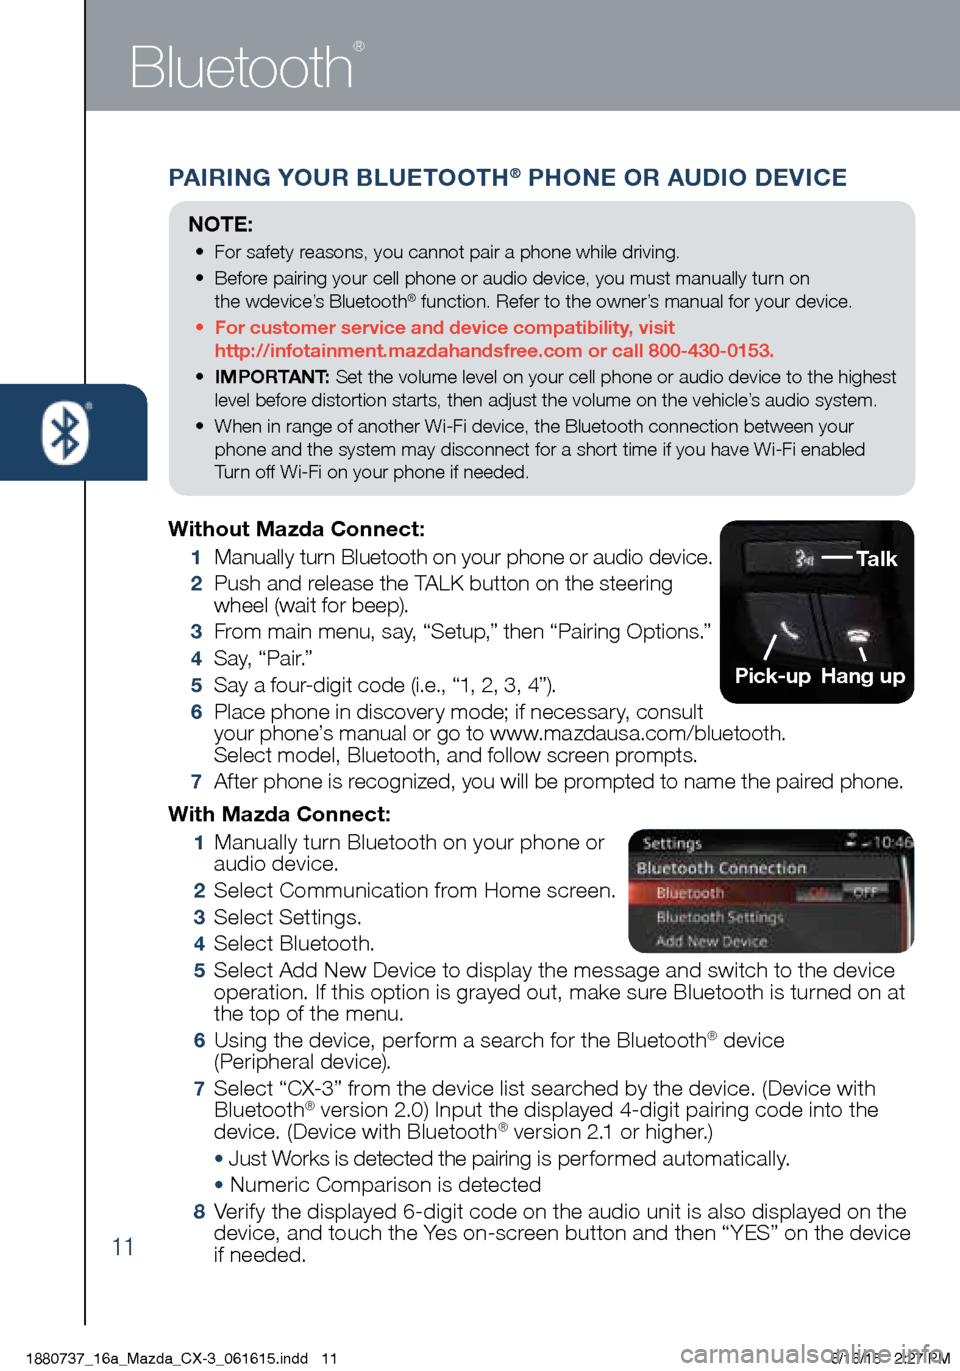 MAZDA MODEL CX-3 2016  Smart Start Guide (in English) 11
PAIRING YOUR BLUETOOTH® PHONE OR AUDIO DEVICE
Bluetooth
®
With Mazda Connect:
 1      Manually turn Bluetooth on your phone or  
audio device.
 2  Select Communication from Home screen.
 3  Selec